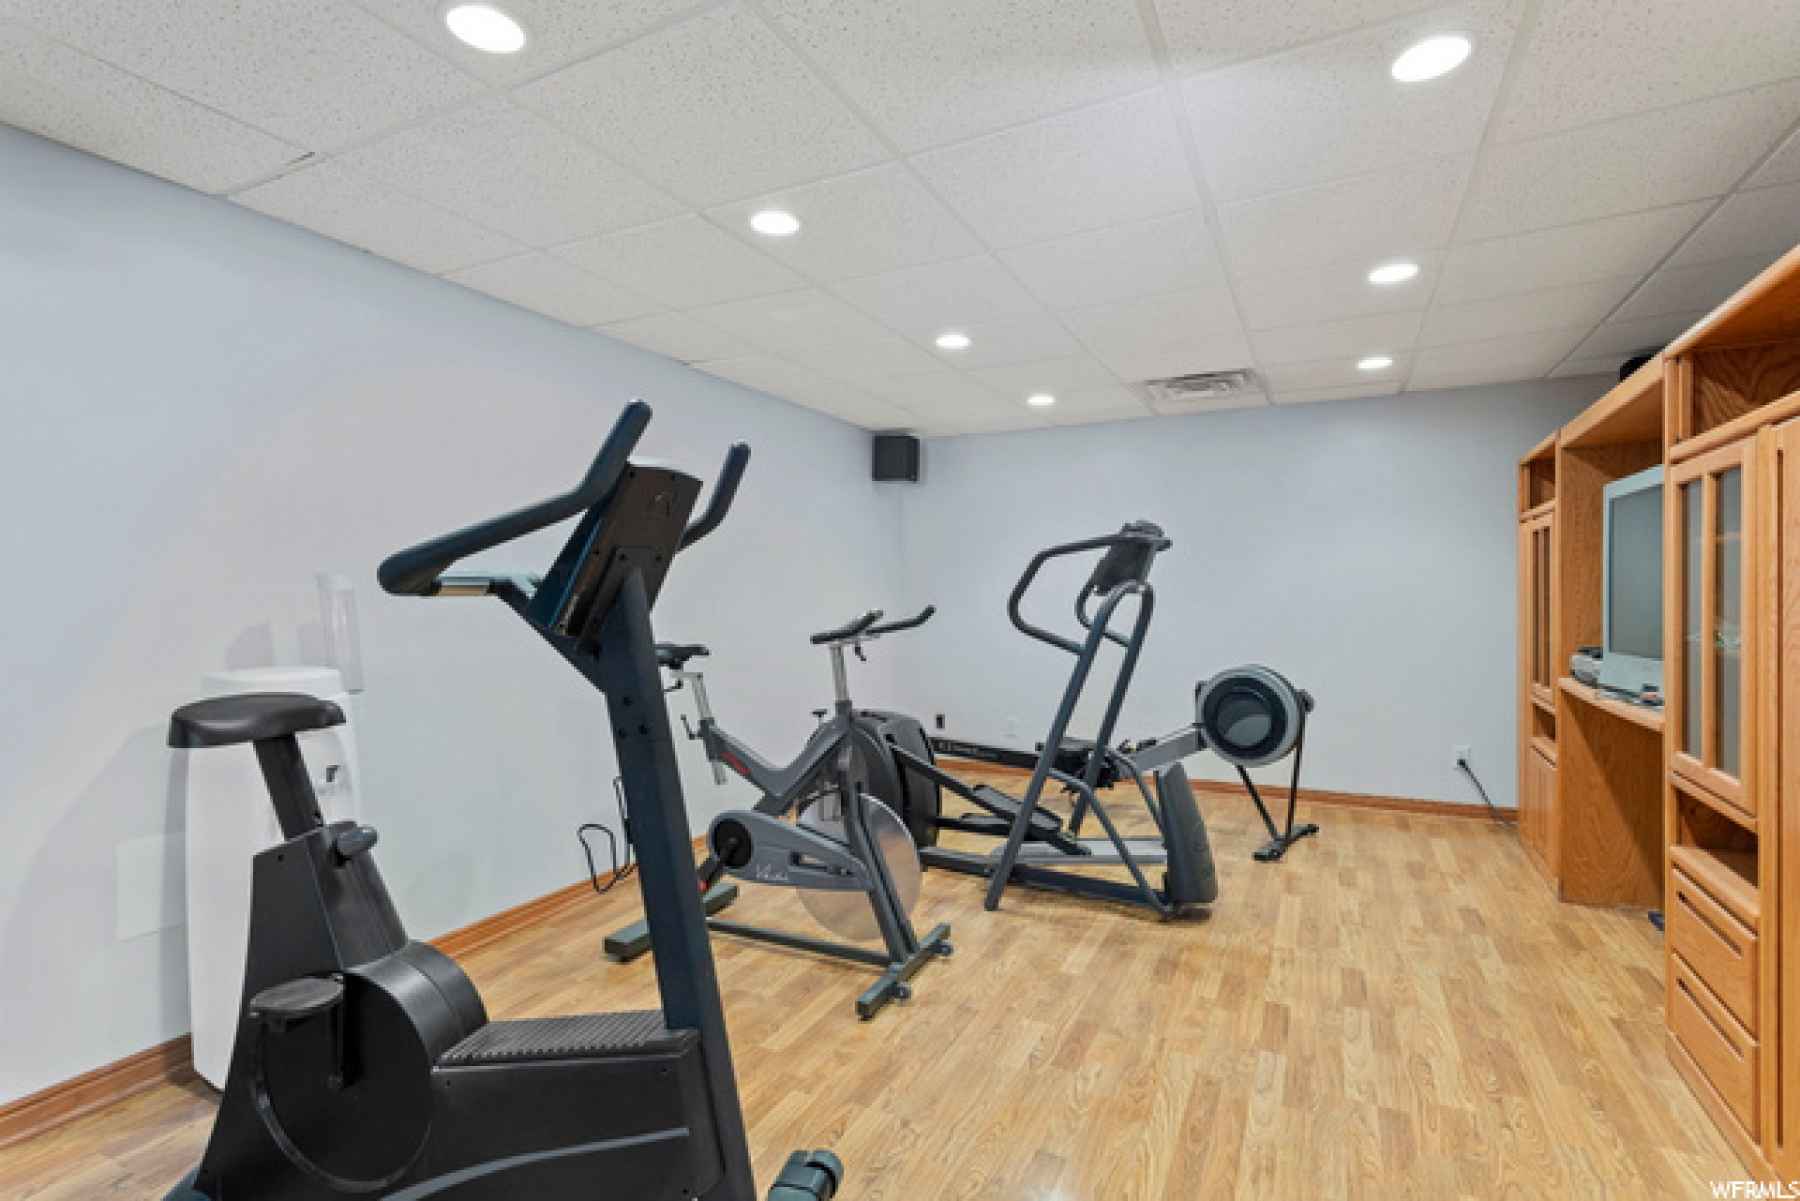 Be entertained as you workout in this side room in the basement workout area.